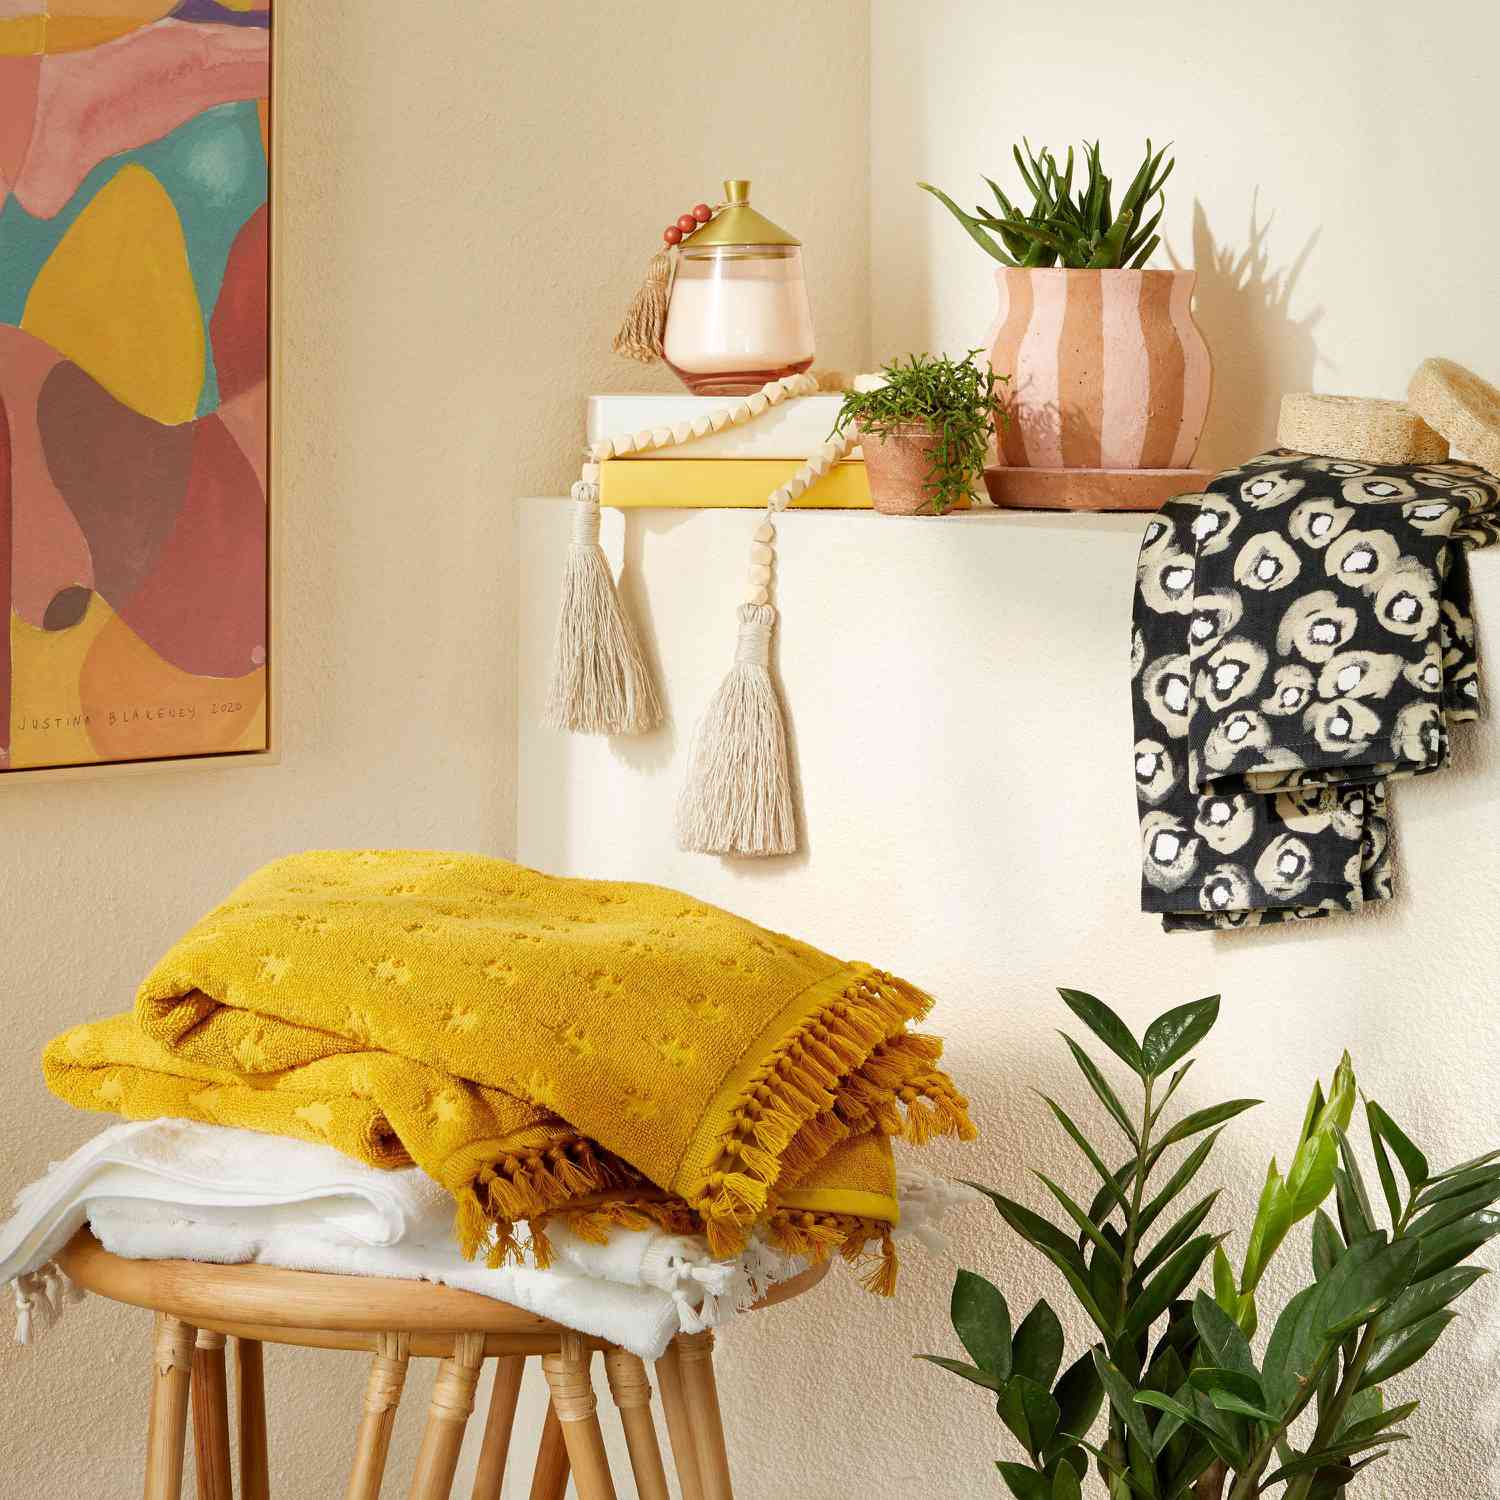 Jacquard Bath Towel with Fringe from Justina Blakeney x Opalhouse collection at Target